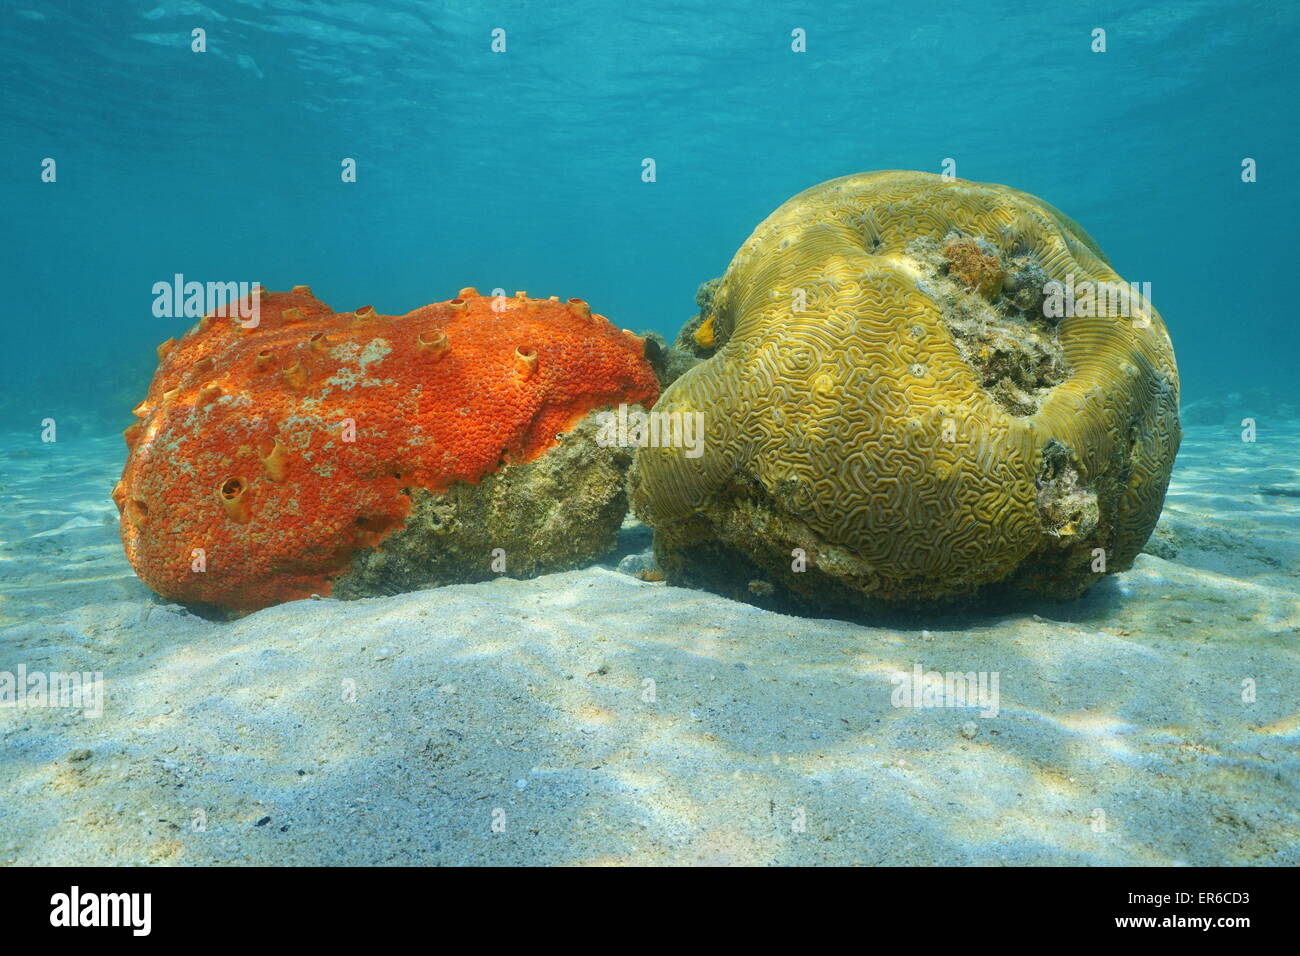 Underwater life, red boring sponge and grooved brain coral on sandy seabed of the Caribbean sea Stock Photo